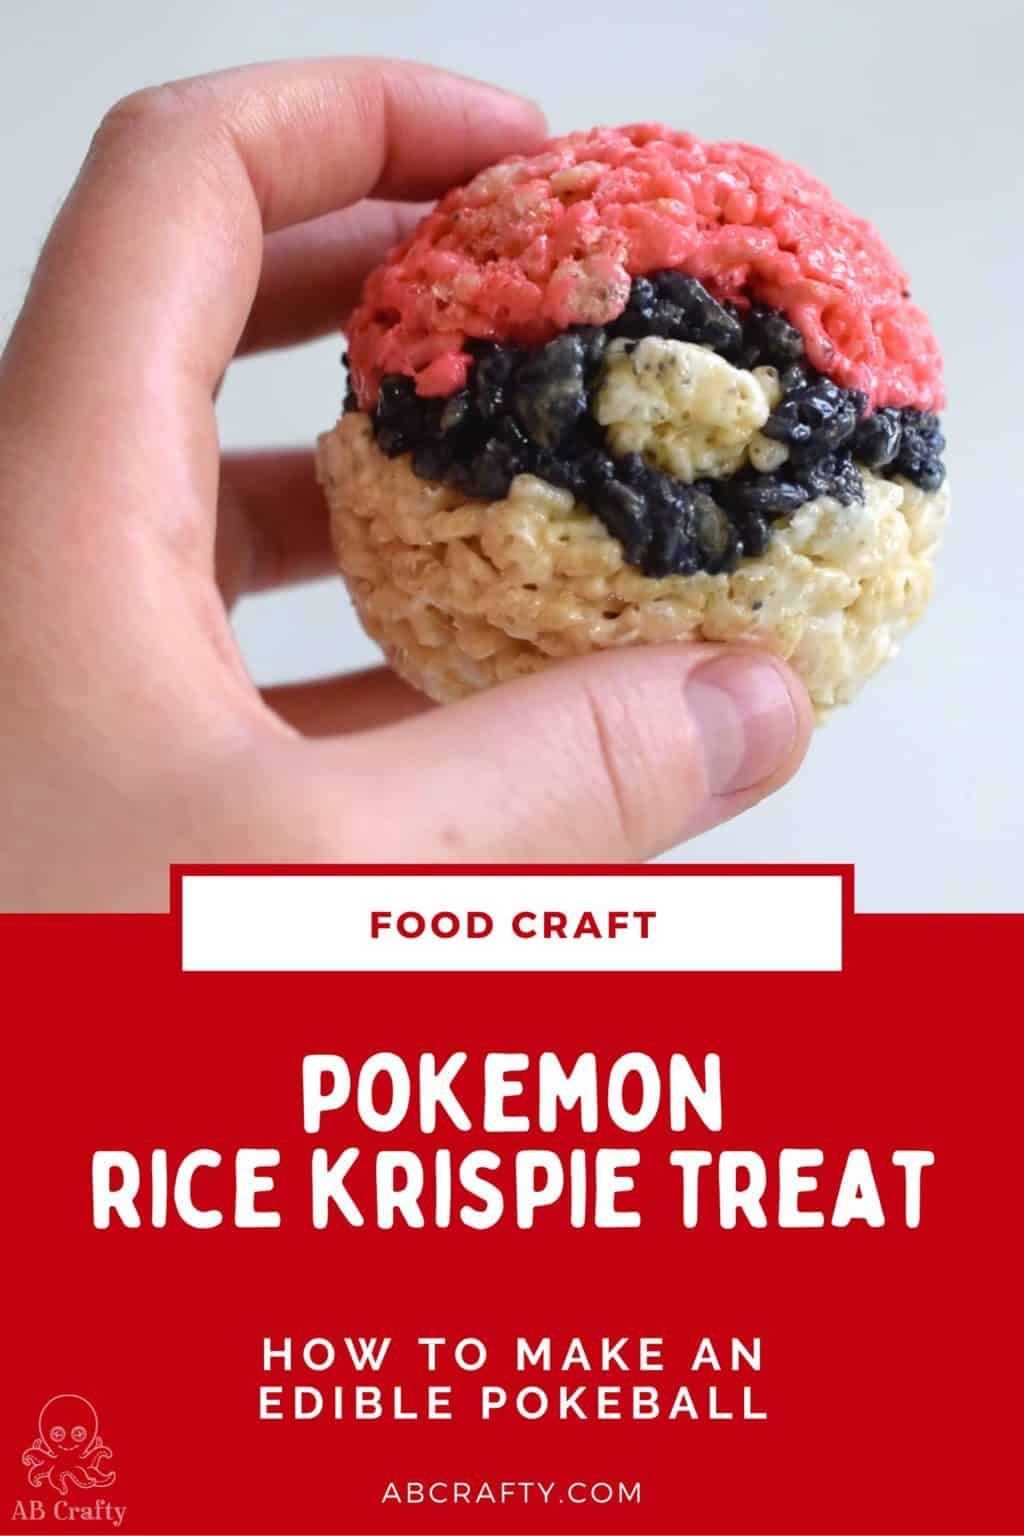 holding the edible pokeball rice krispie treat with the title "food craft - pokemon rice krispie treats - how to make an edible pokeball, abcrafty.com"